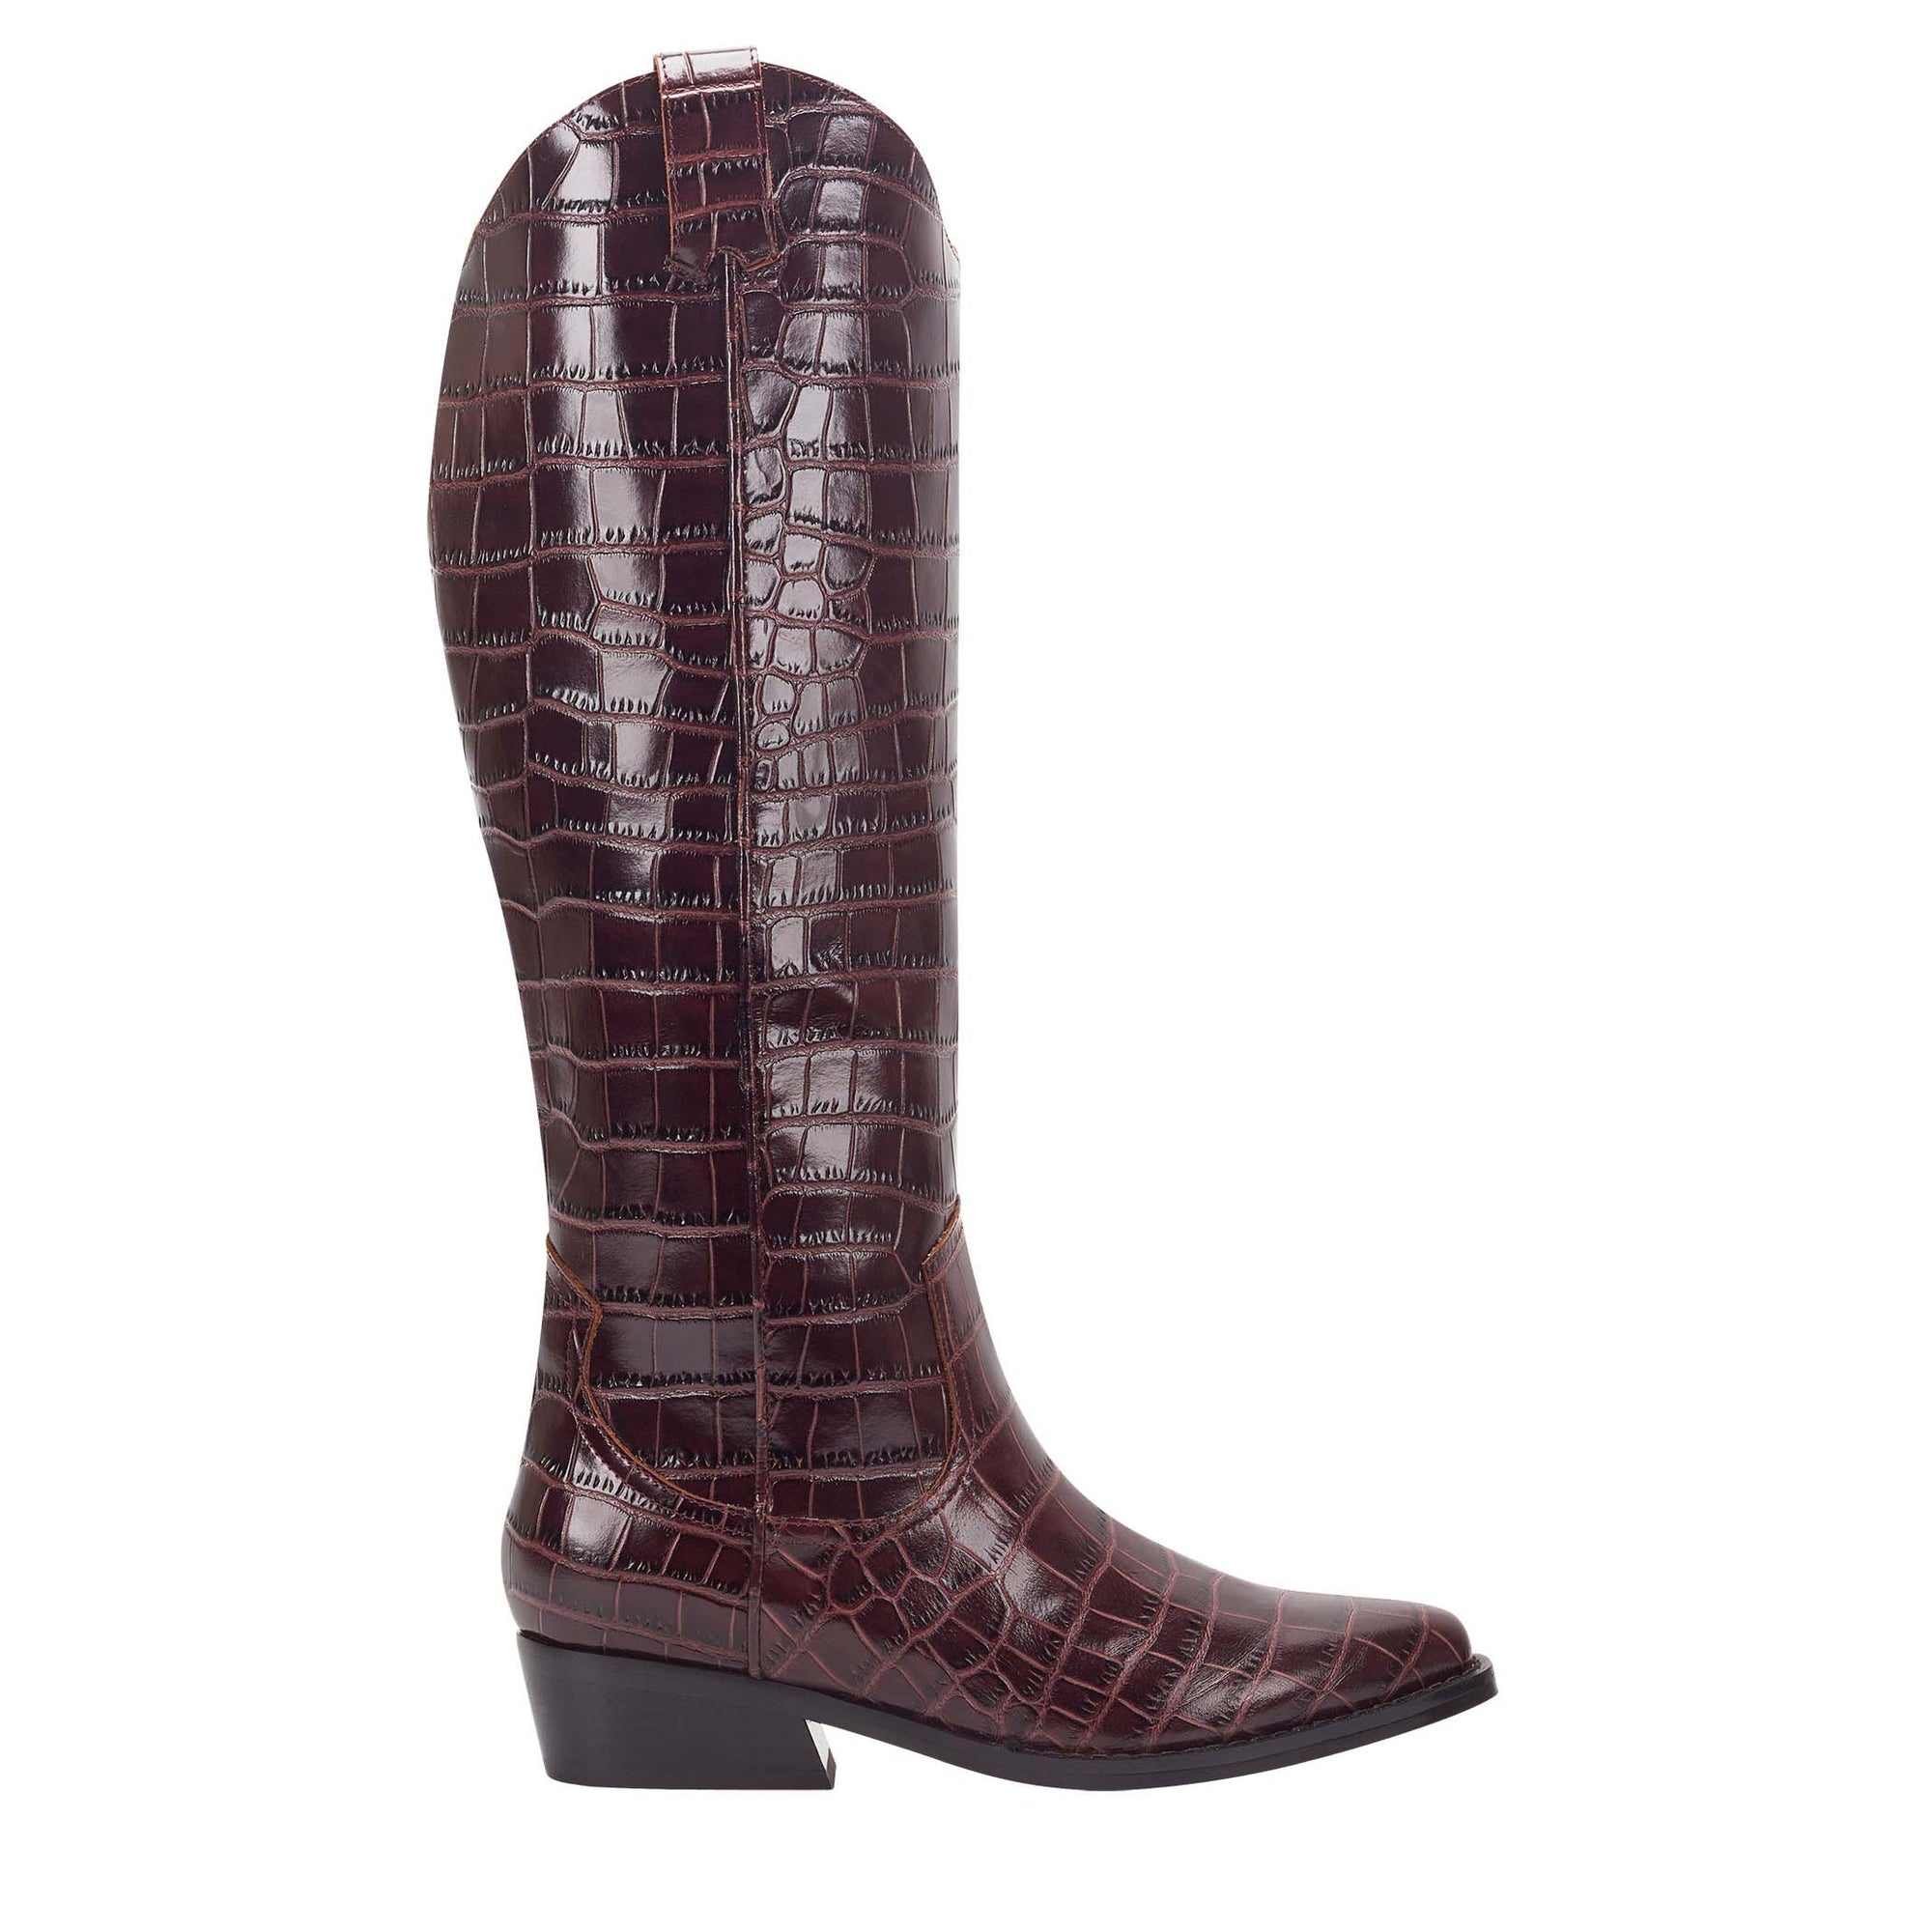 marc fisher burgundy boots